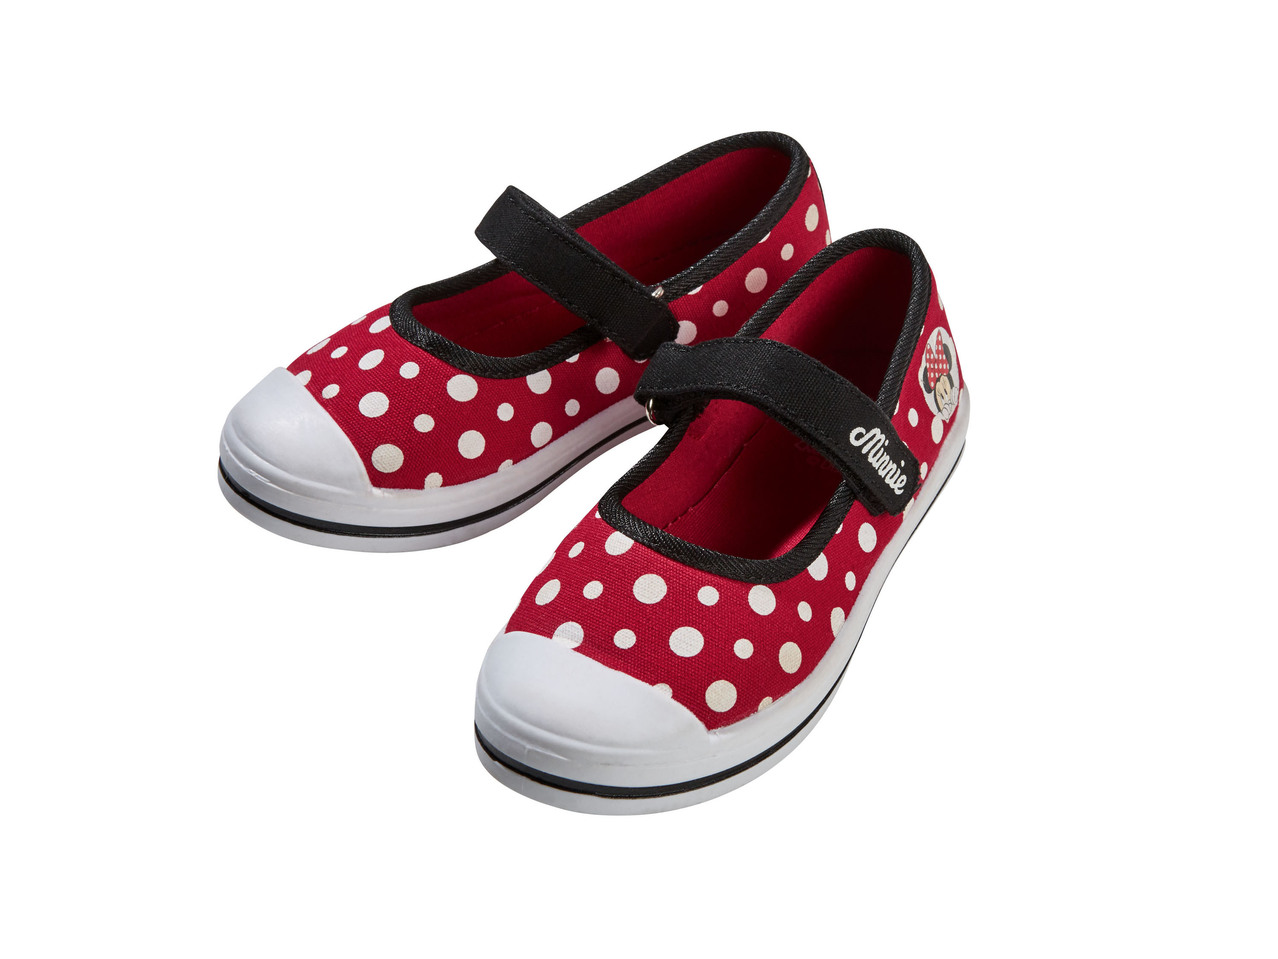 Girls' Casual Shoes - "Minnie, Frozen, Paw Patrol"